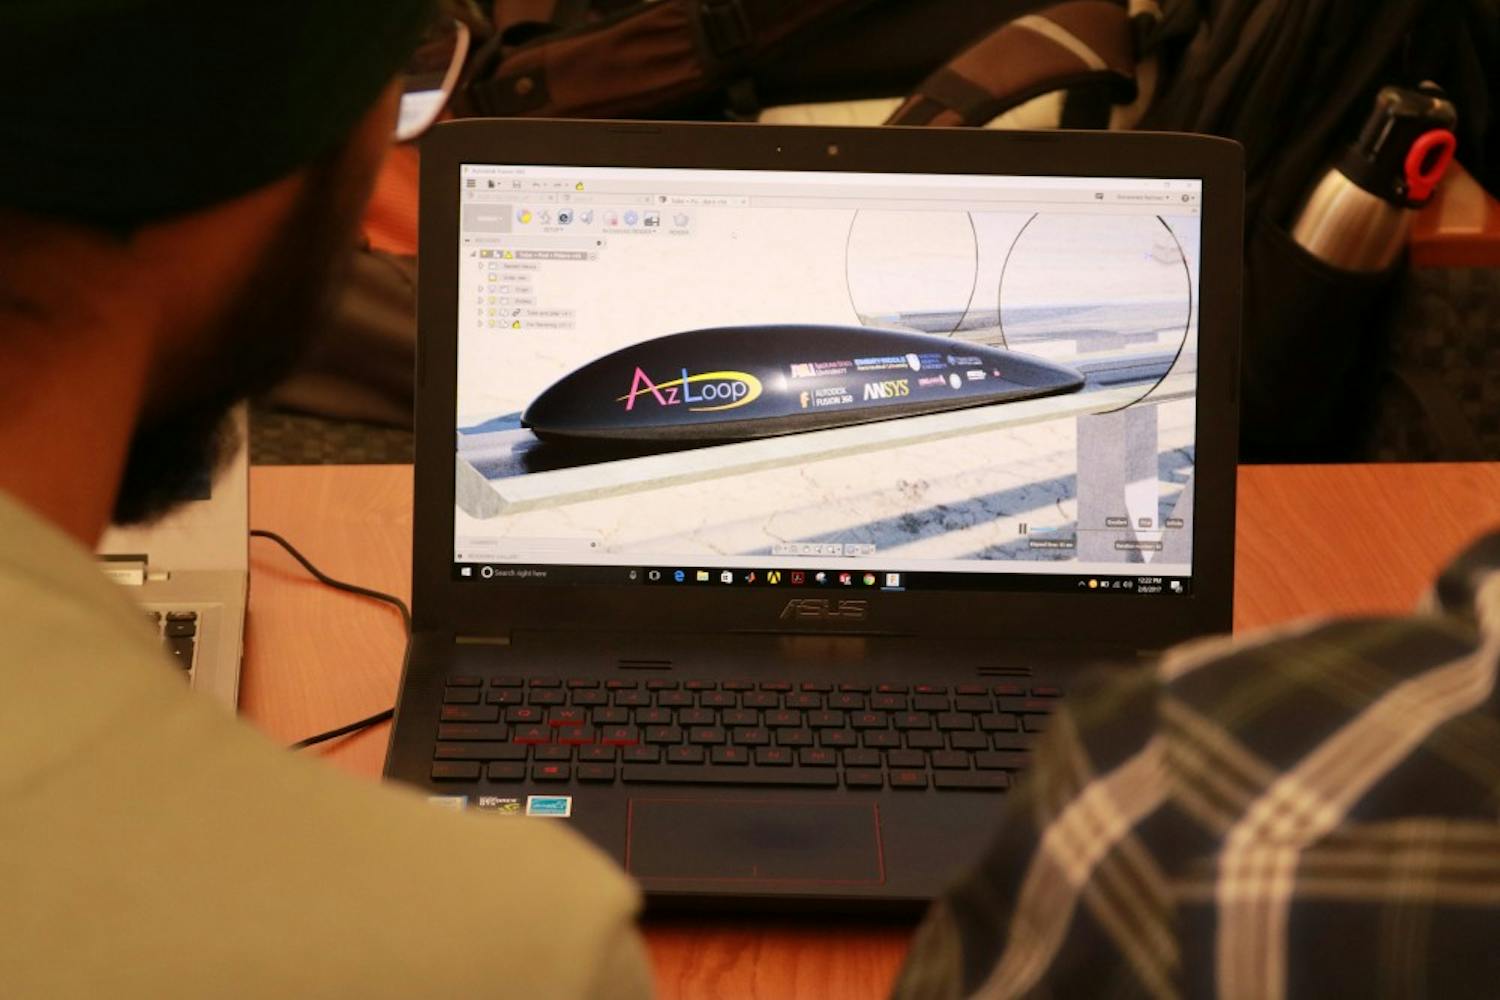 Students from the AZloop Hyperloop team work on the final pod design at the ASU Polytechnic campus on Friday, Feb.&nbsp;10, 2017.